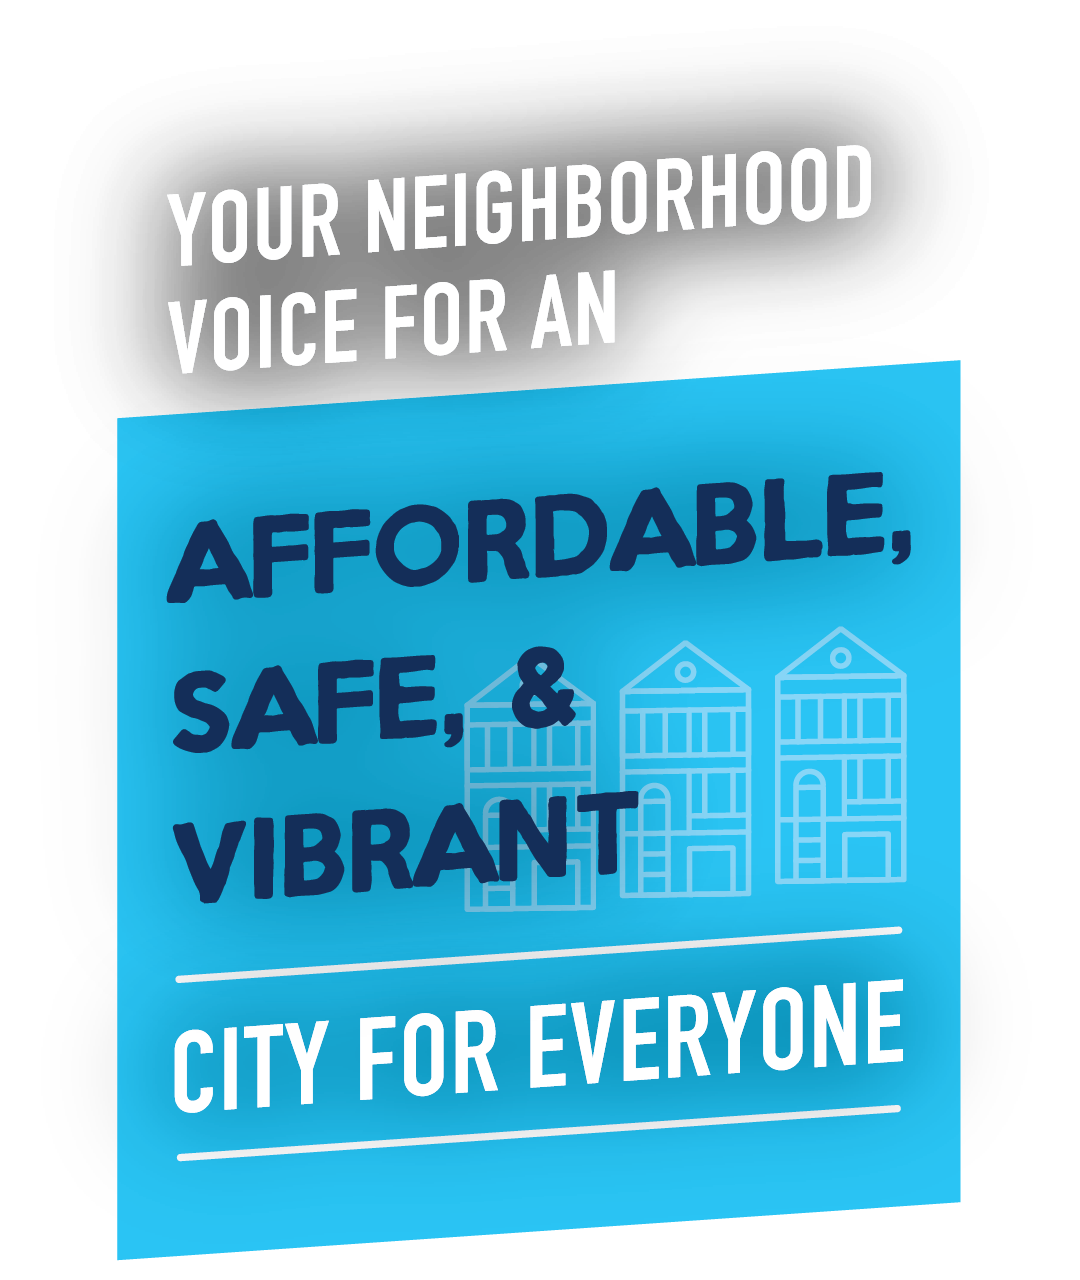 Your Neighborhood Voice for an Affordable, Safe, & Vibrant City for Everyone!